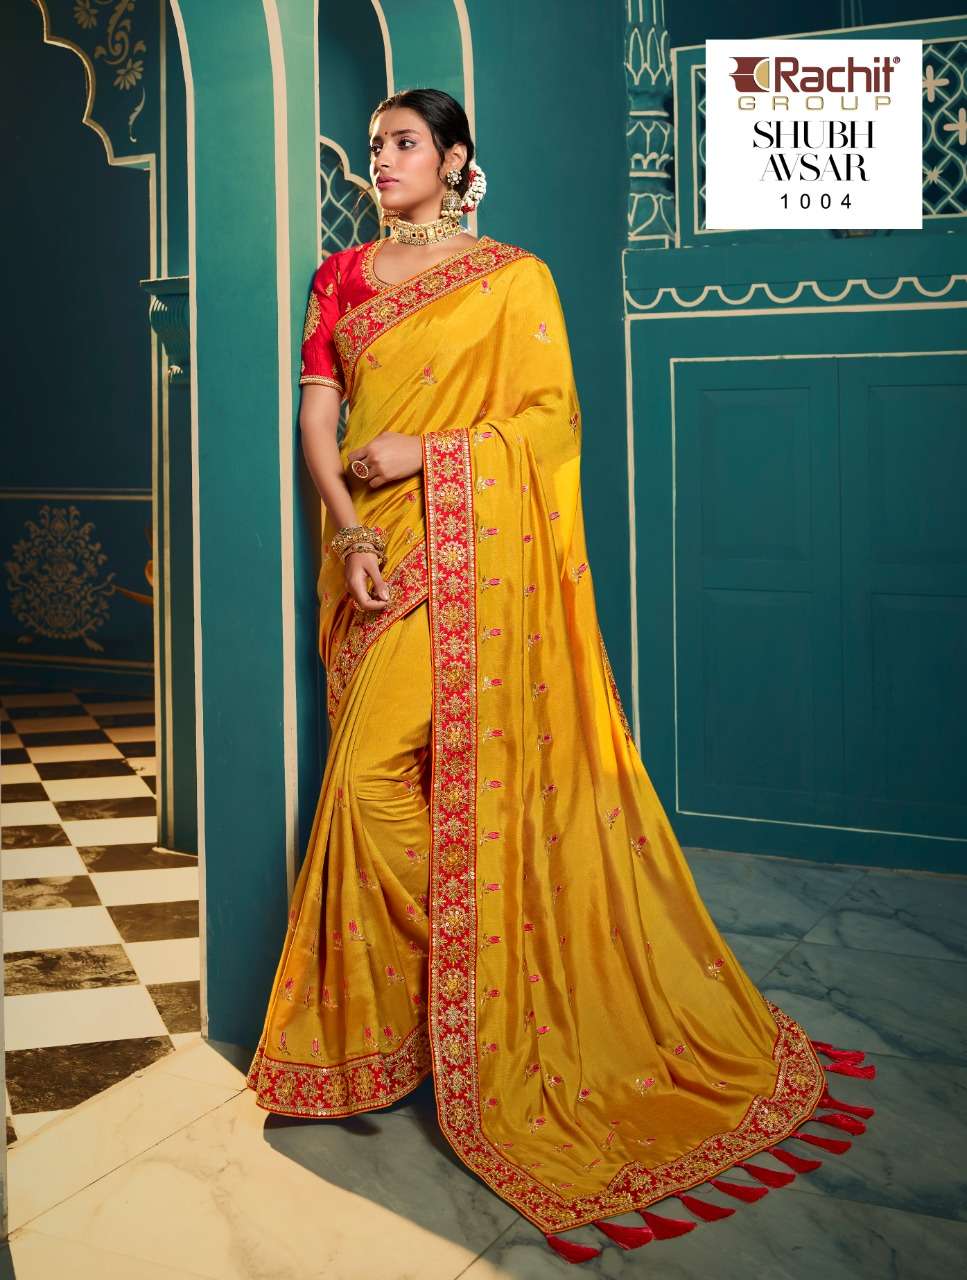 RACHIT 1000 Series AVSAR FANCY PARTY WEAR SAREE COLLECTION